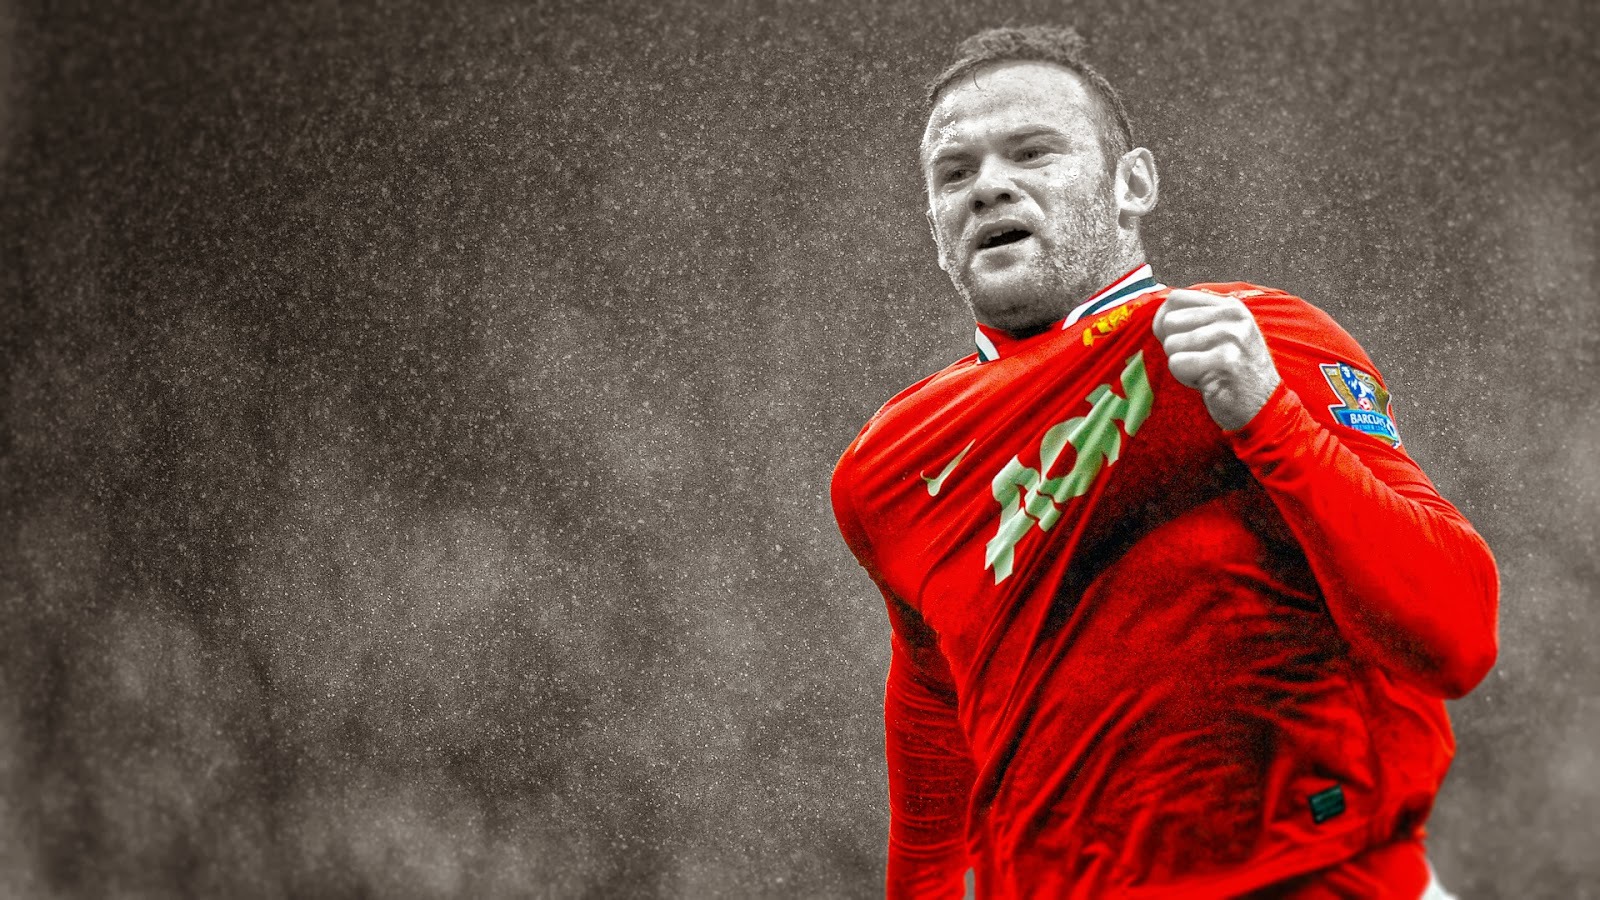 The best football player of Manchester United Wayne Rooney ...